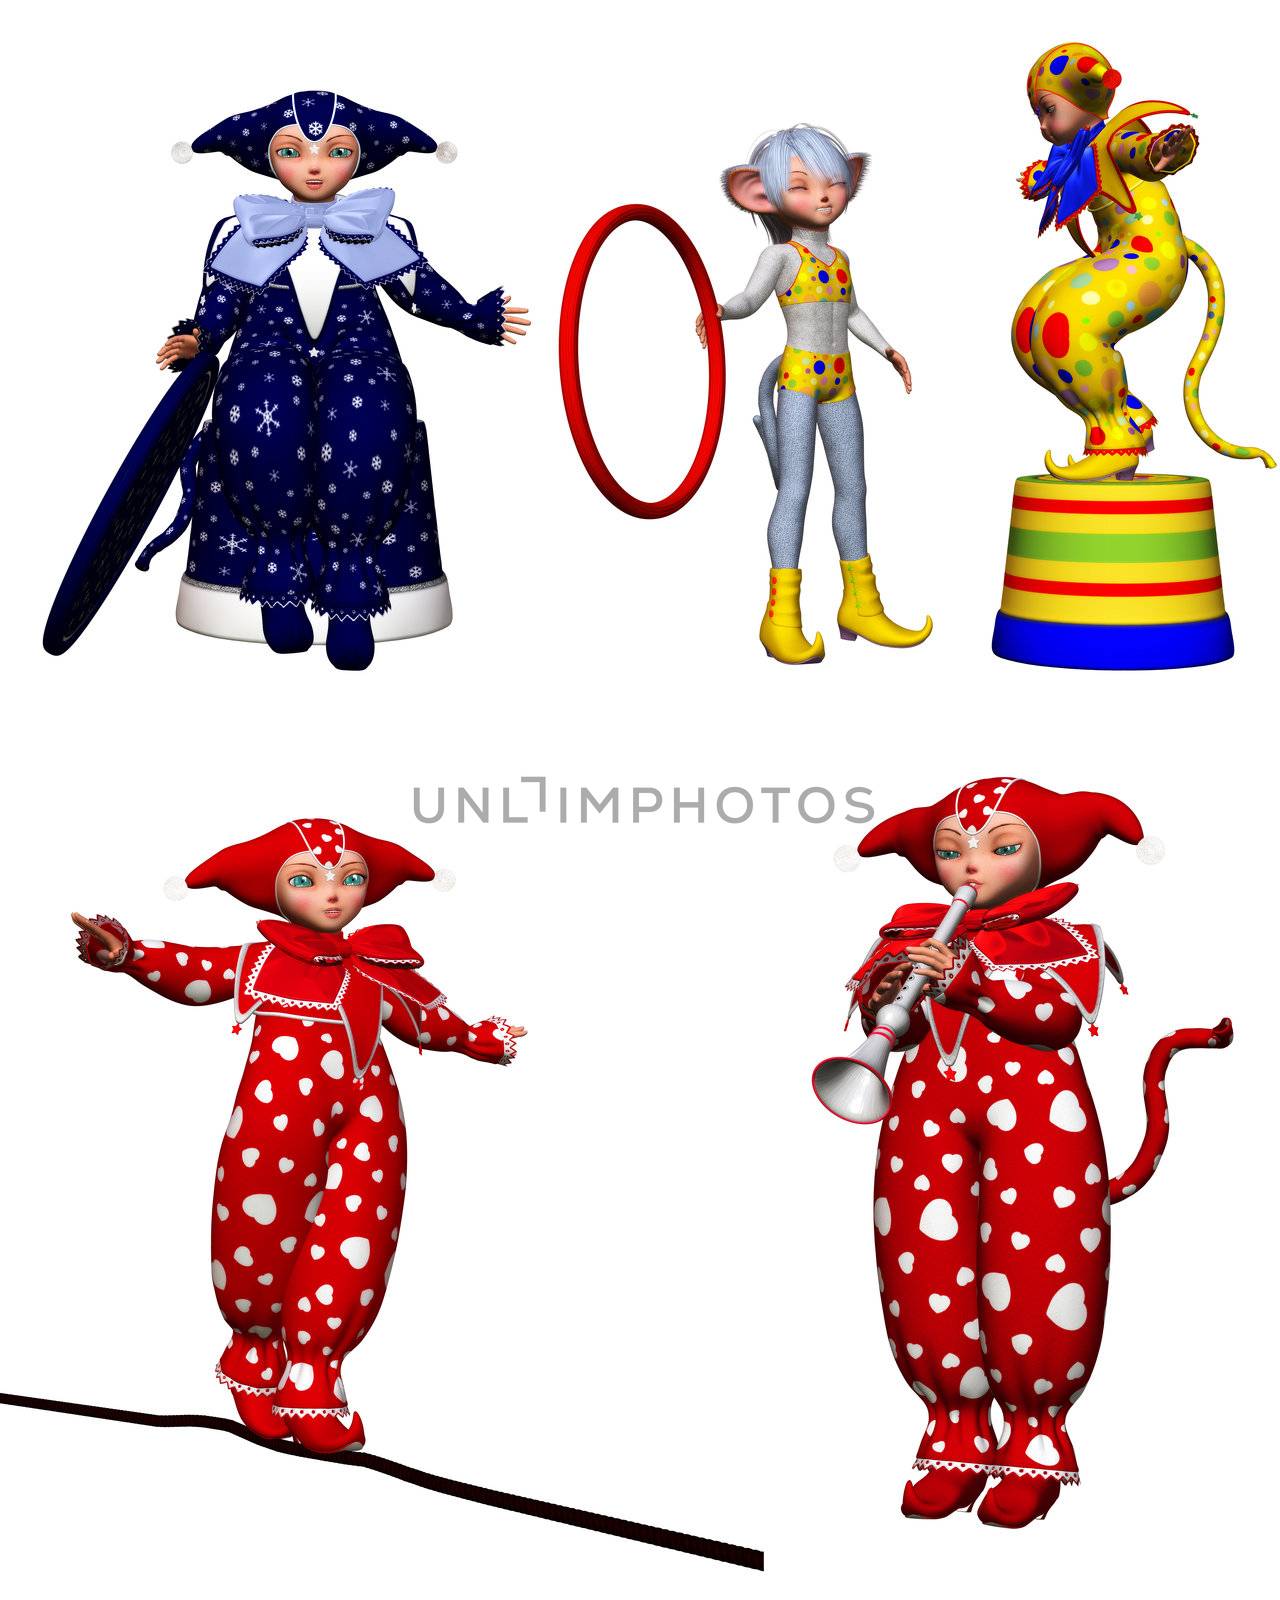 sweet harlequin clowns at the performance - isolated on white